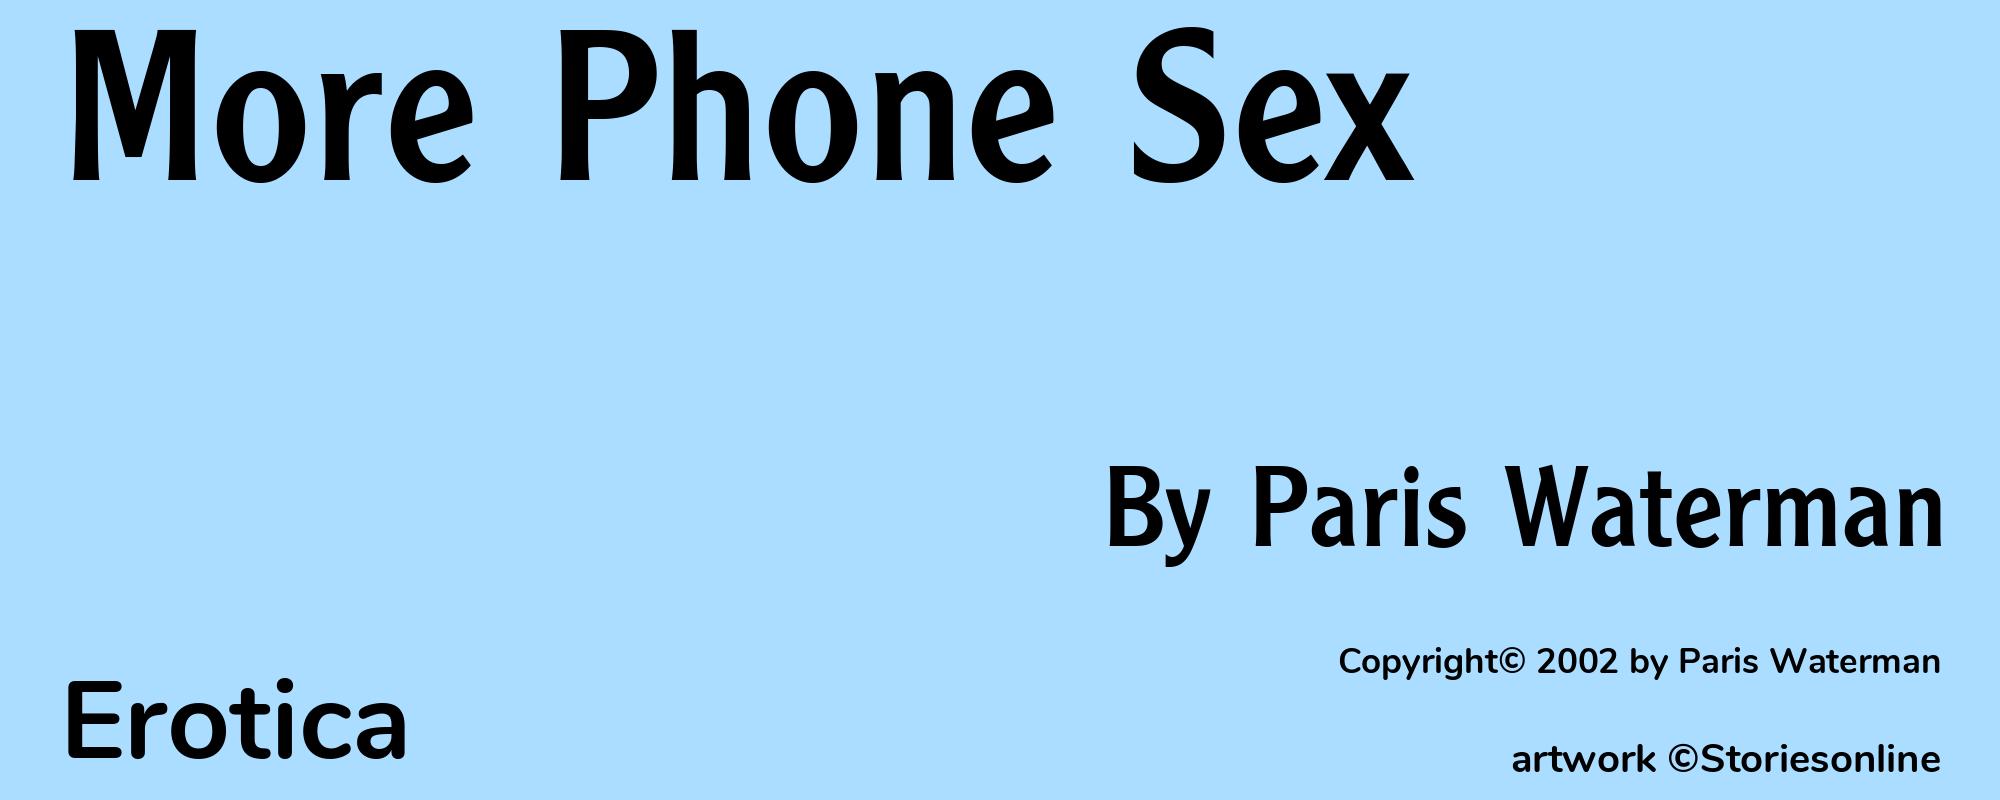 More Phone Sex - Cover